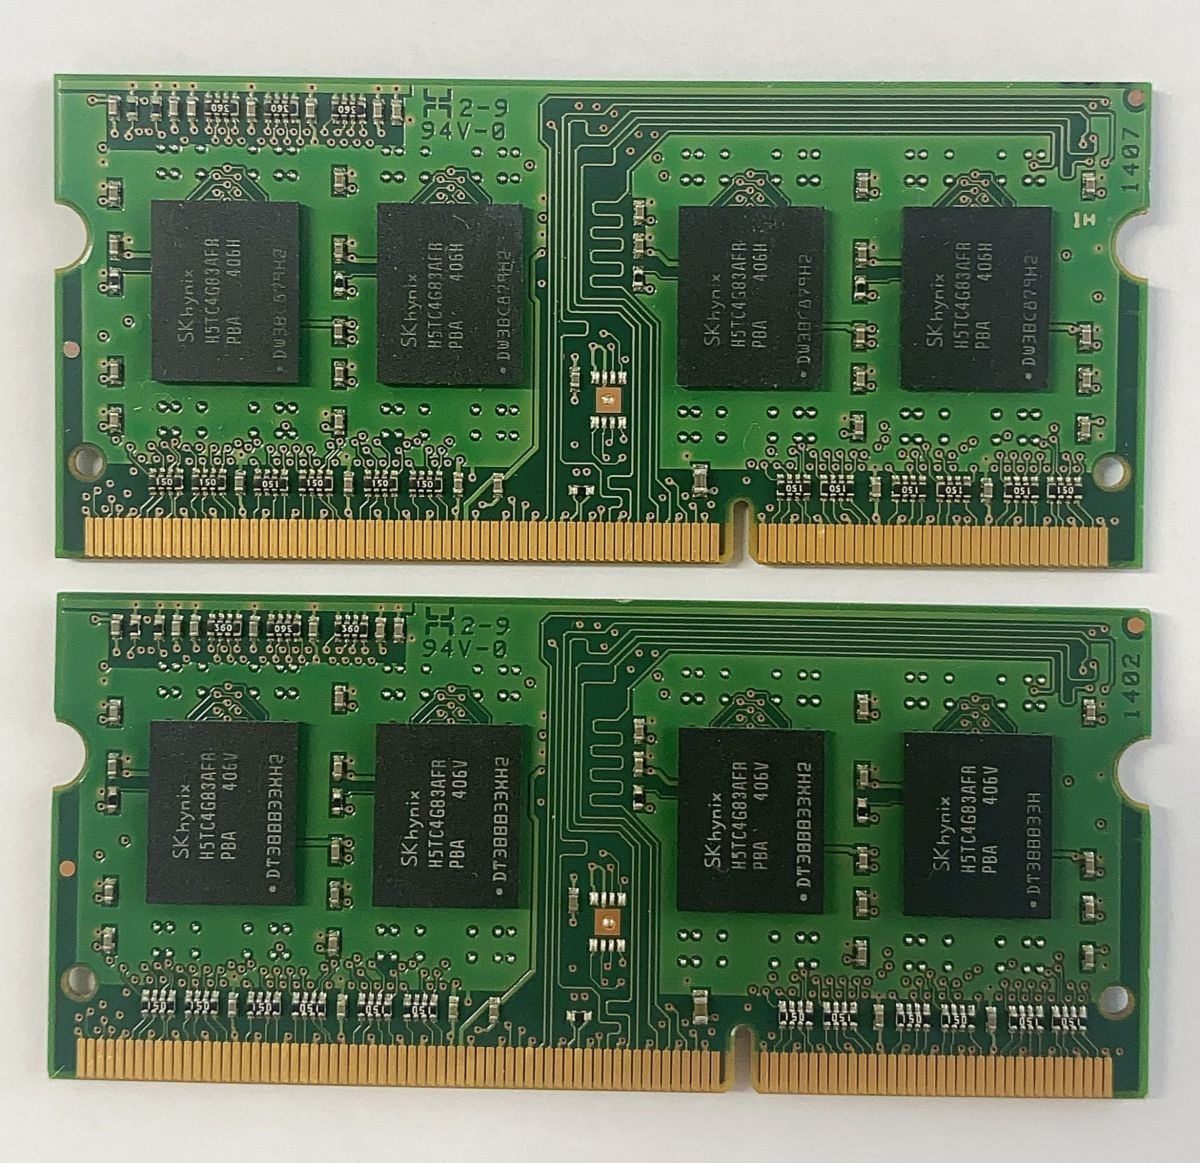 * free shipping *SANMAX Technologies 1R×8 PC3L-12800S 4GB×2 total 8GB Note for memory * operation goods *ML01* stock great number *